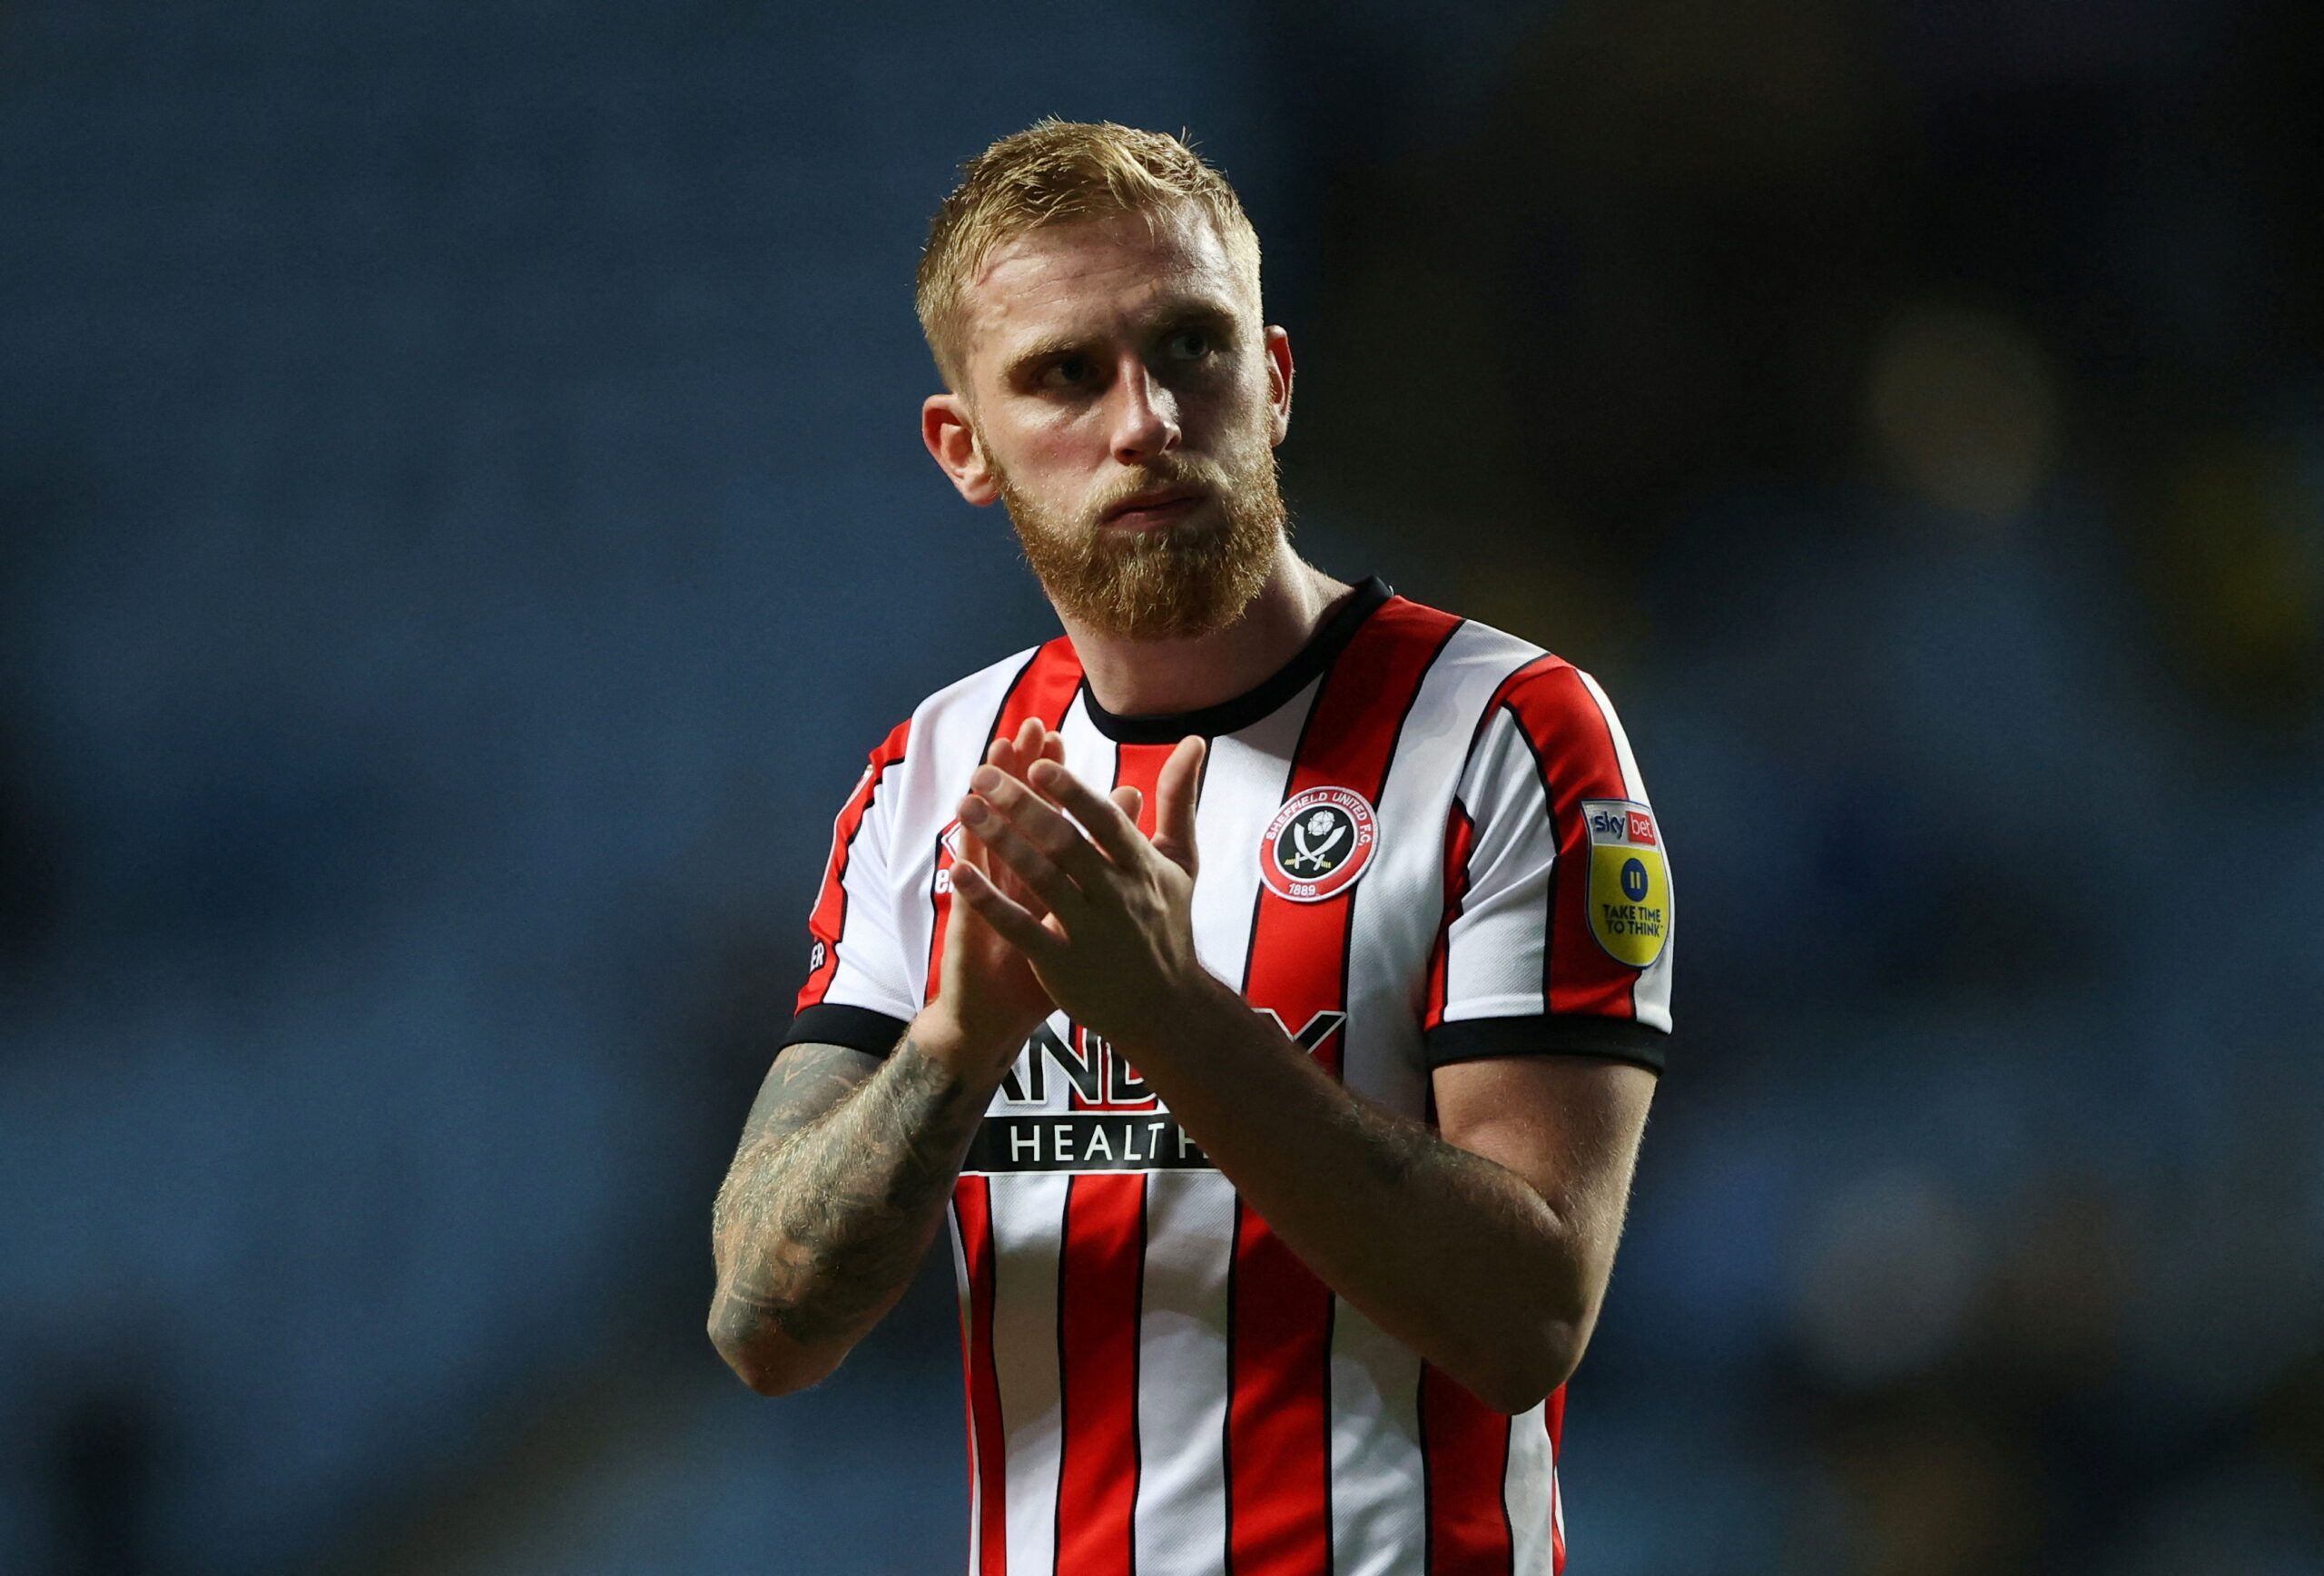 Soccer Football - Championship - Coventry City v Sheffield United - Coventry Building Society Arena, Coventry, Britain - October 19, 2022 Sheffield United's Oli McBurnie looks dejected after the match   Action Images/Molly Darlington  EDITORIAL USE ONLY. No use with unauthorized audio, video, data, fixture lists, club/league logos or 